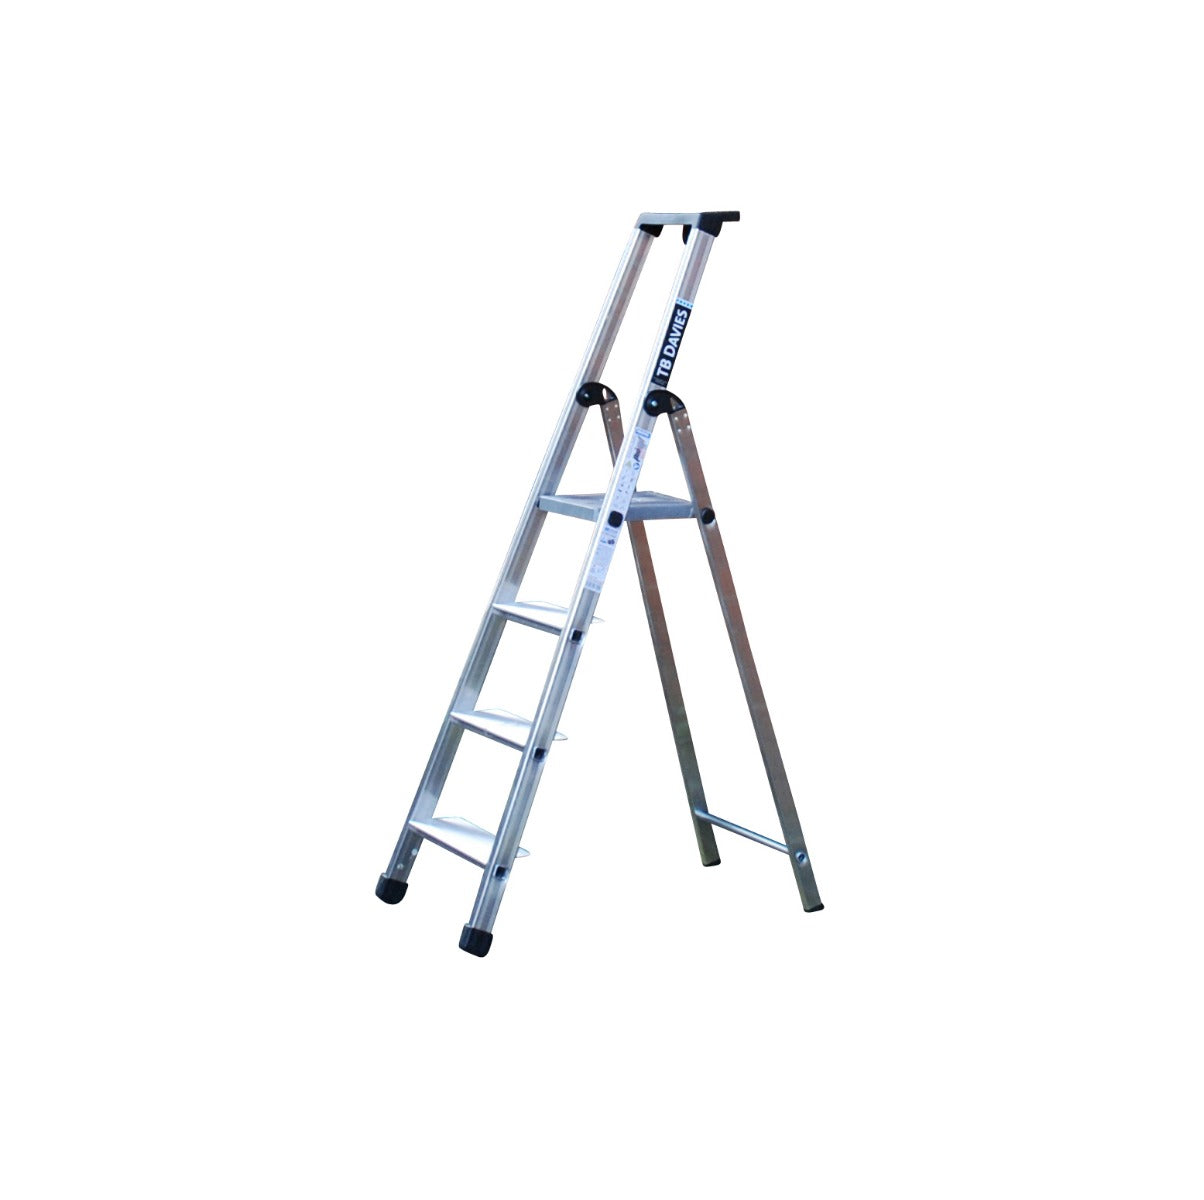 Maxi Platform Step Ladders With Wide Steps - 4 Tread